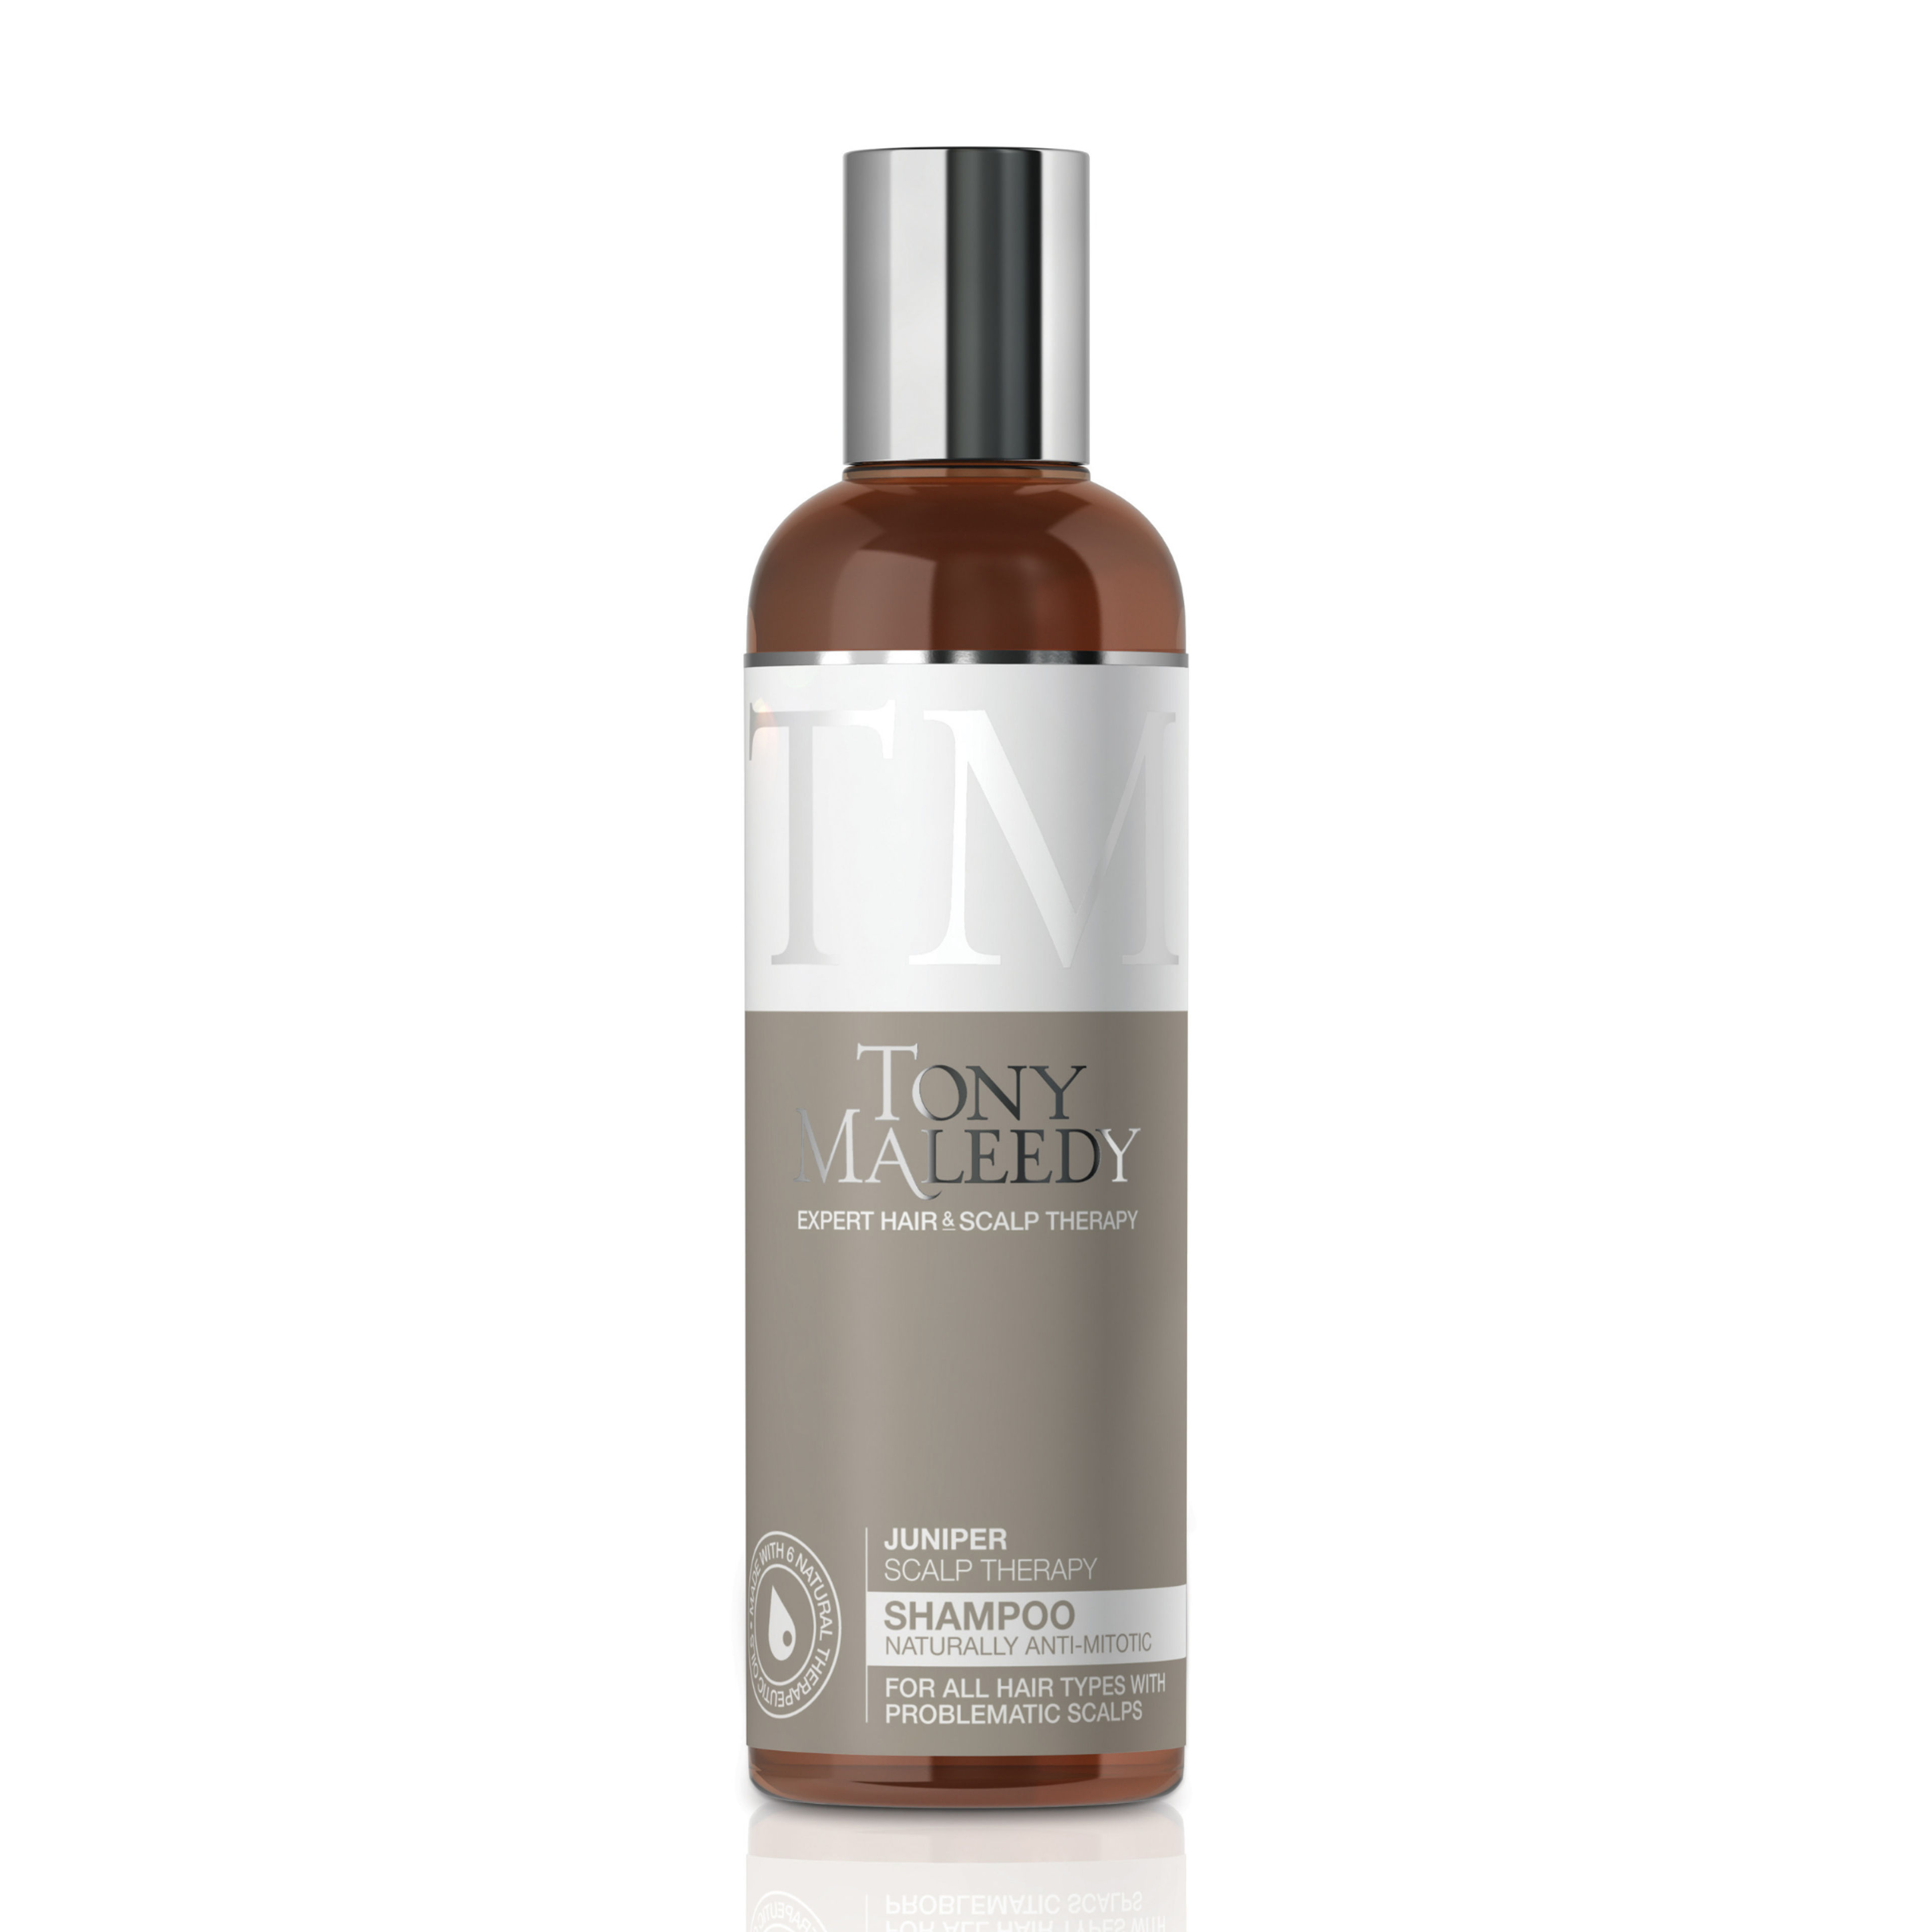 Juniper Scalp Therapy Shampoo image 1 expanded